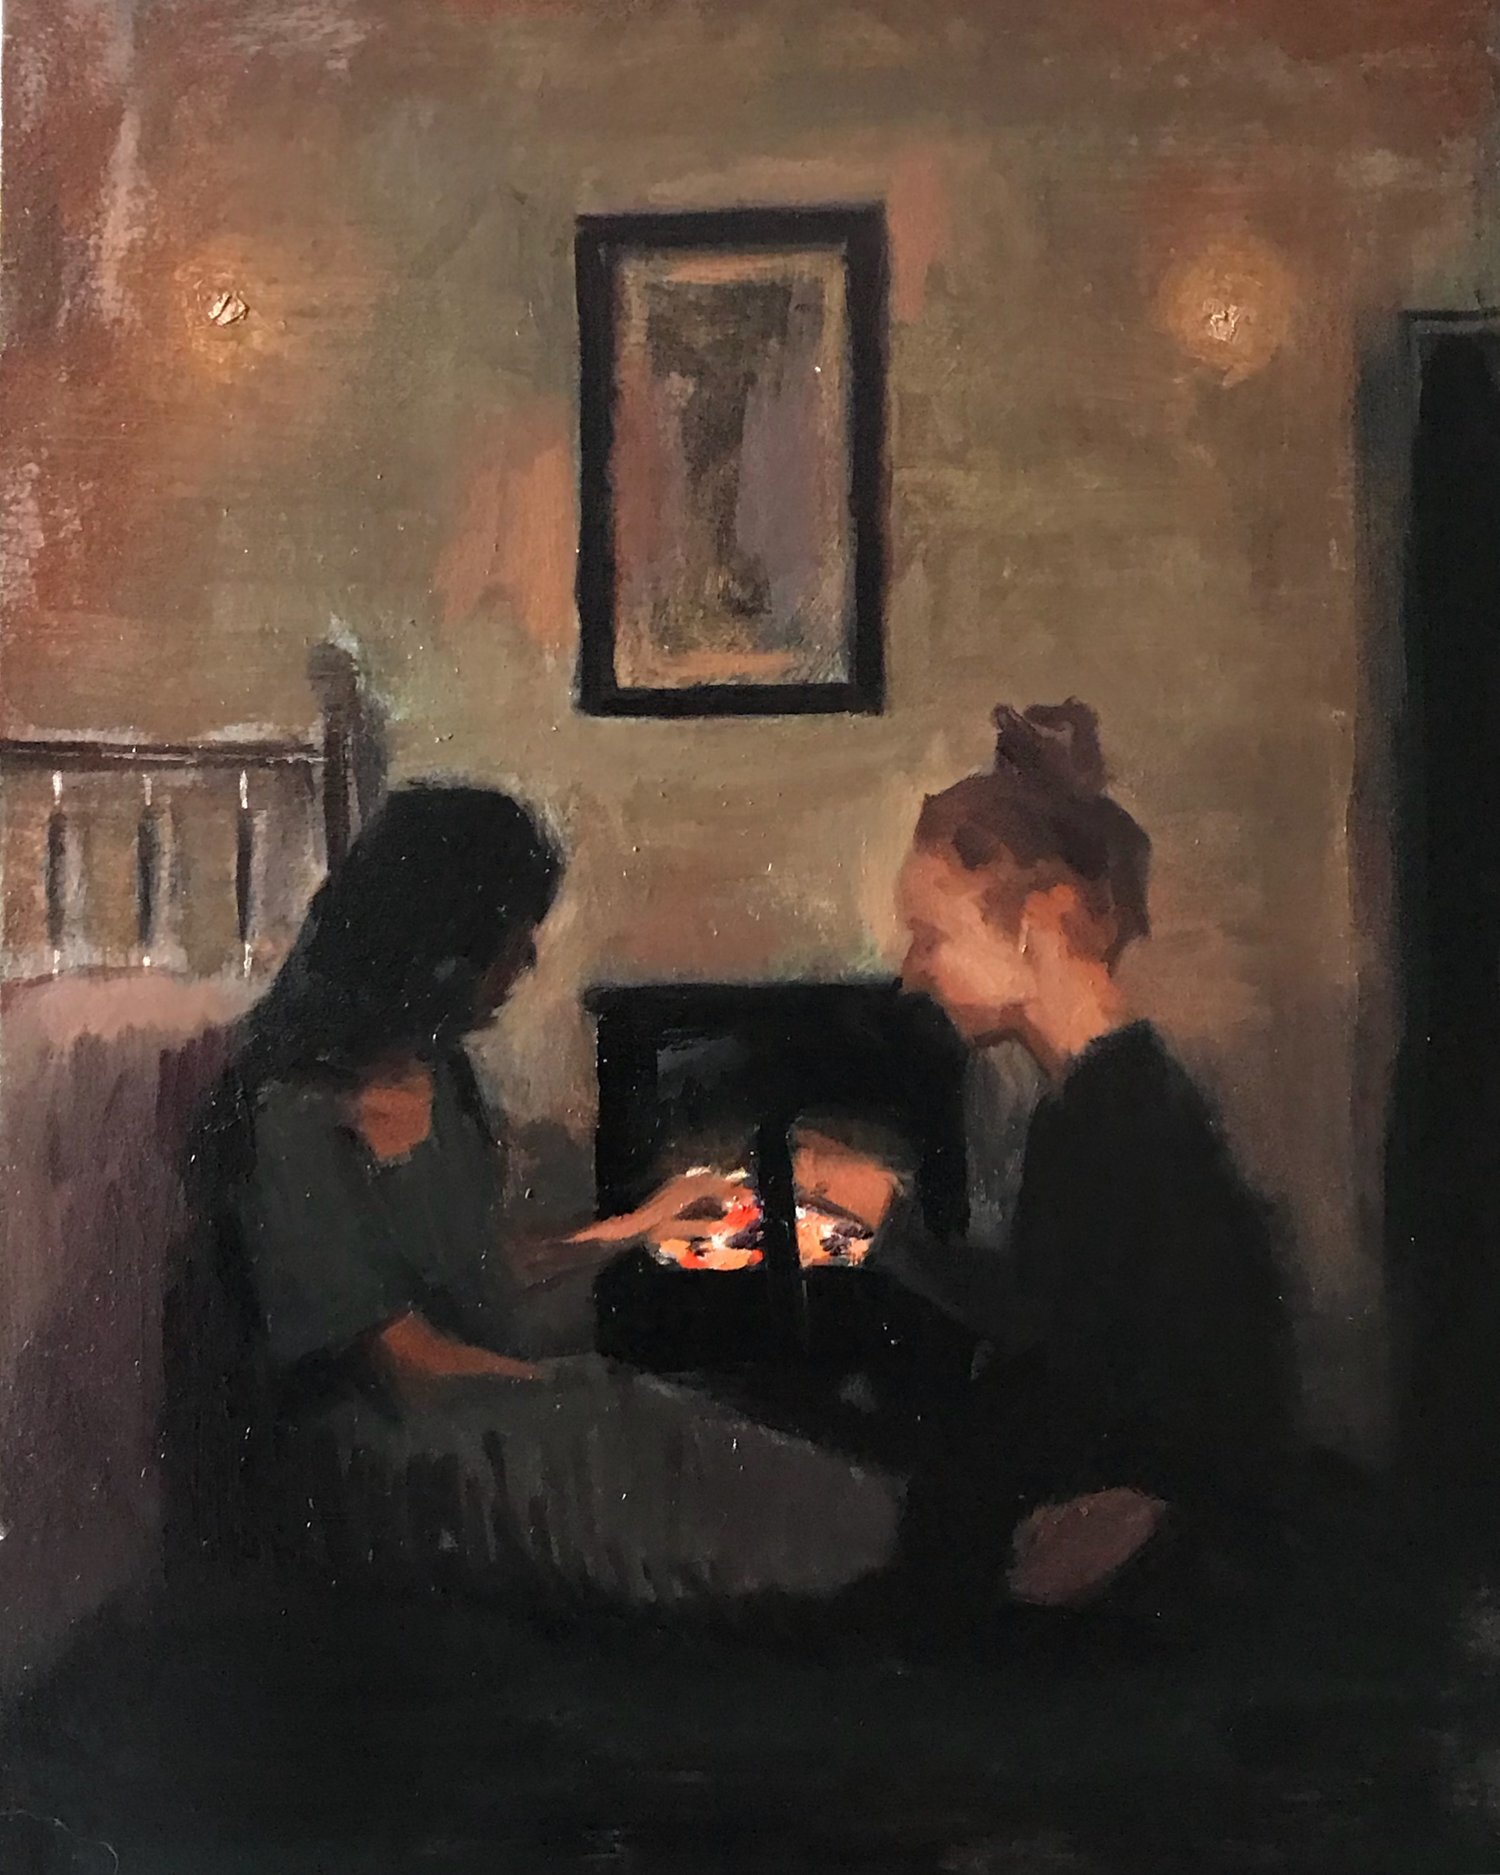 Women and Fire